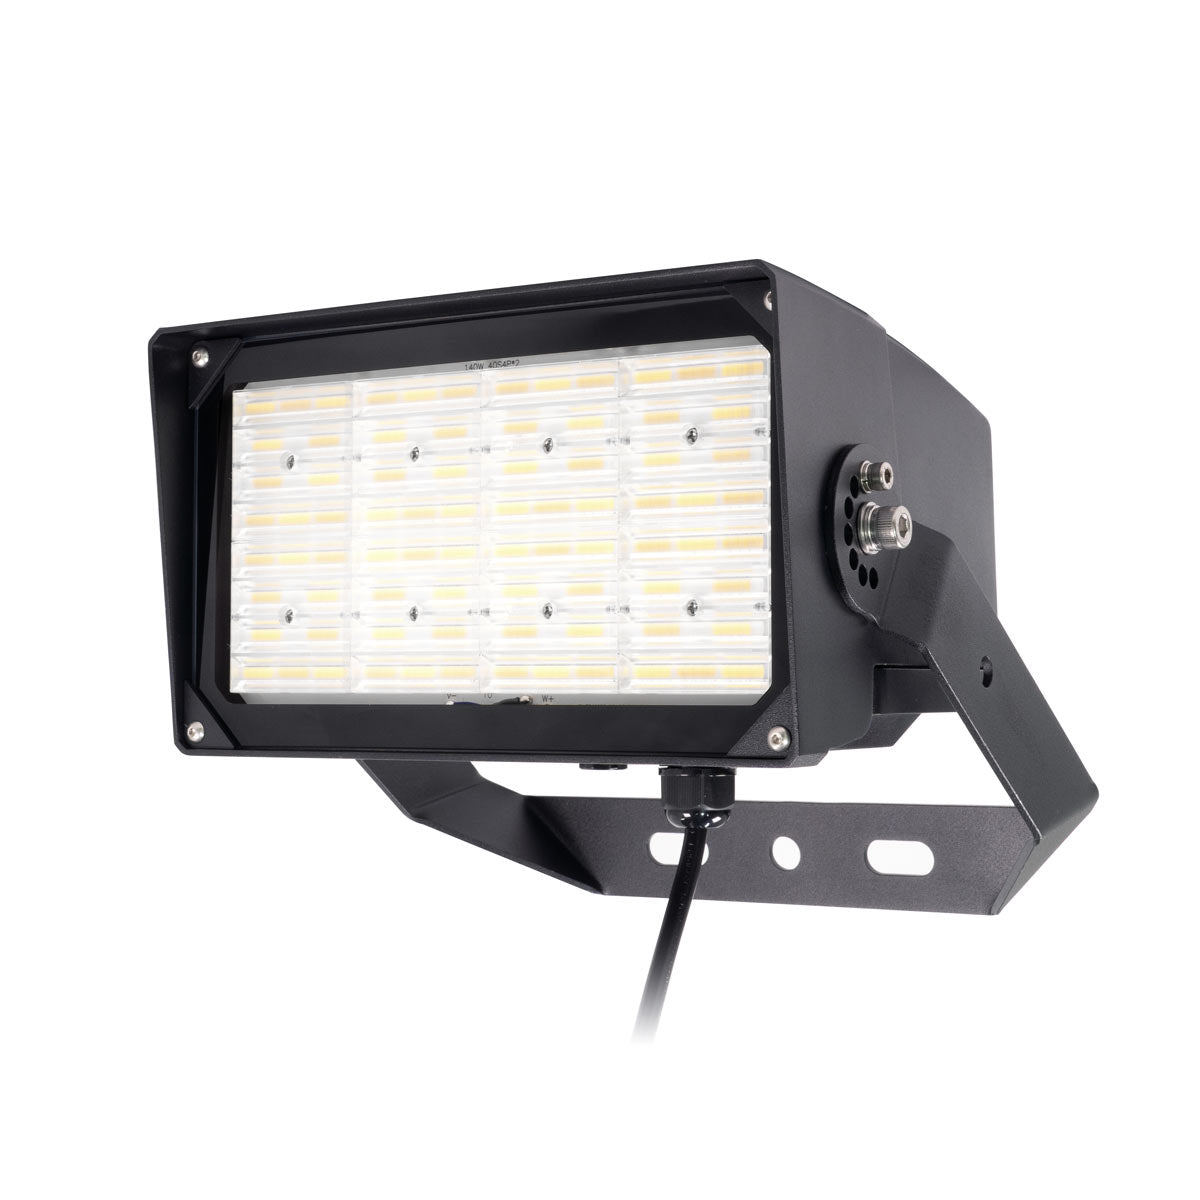 Selectable LUX LED Flood Light - 100W to 300W